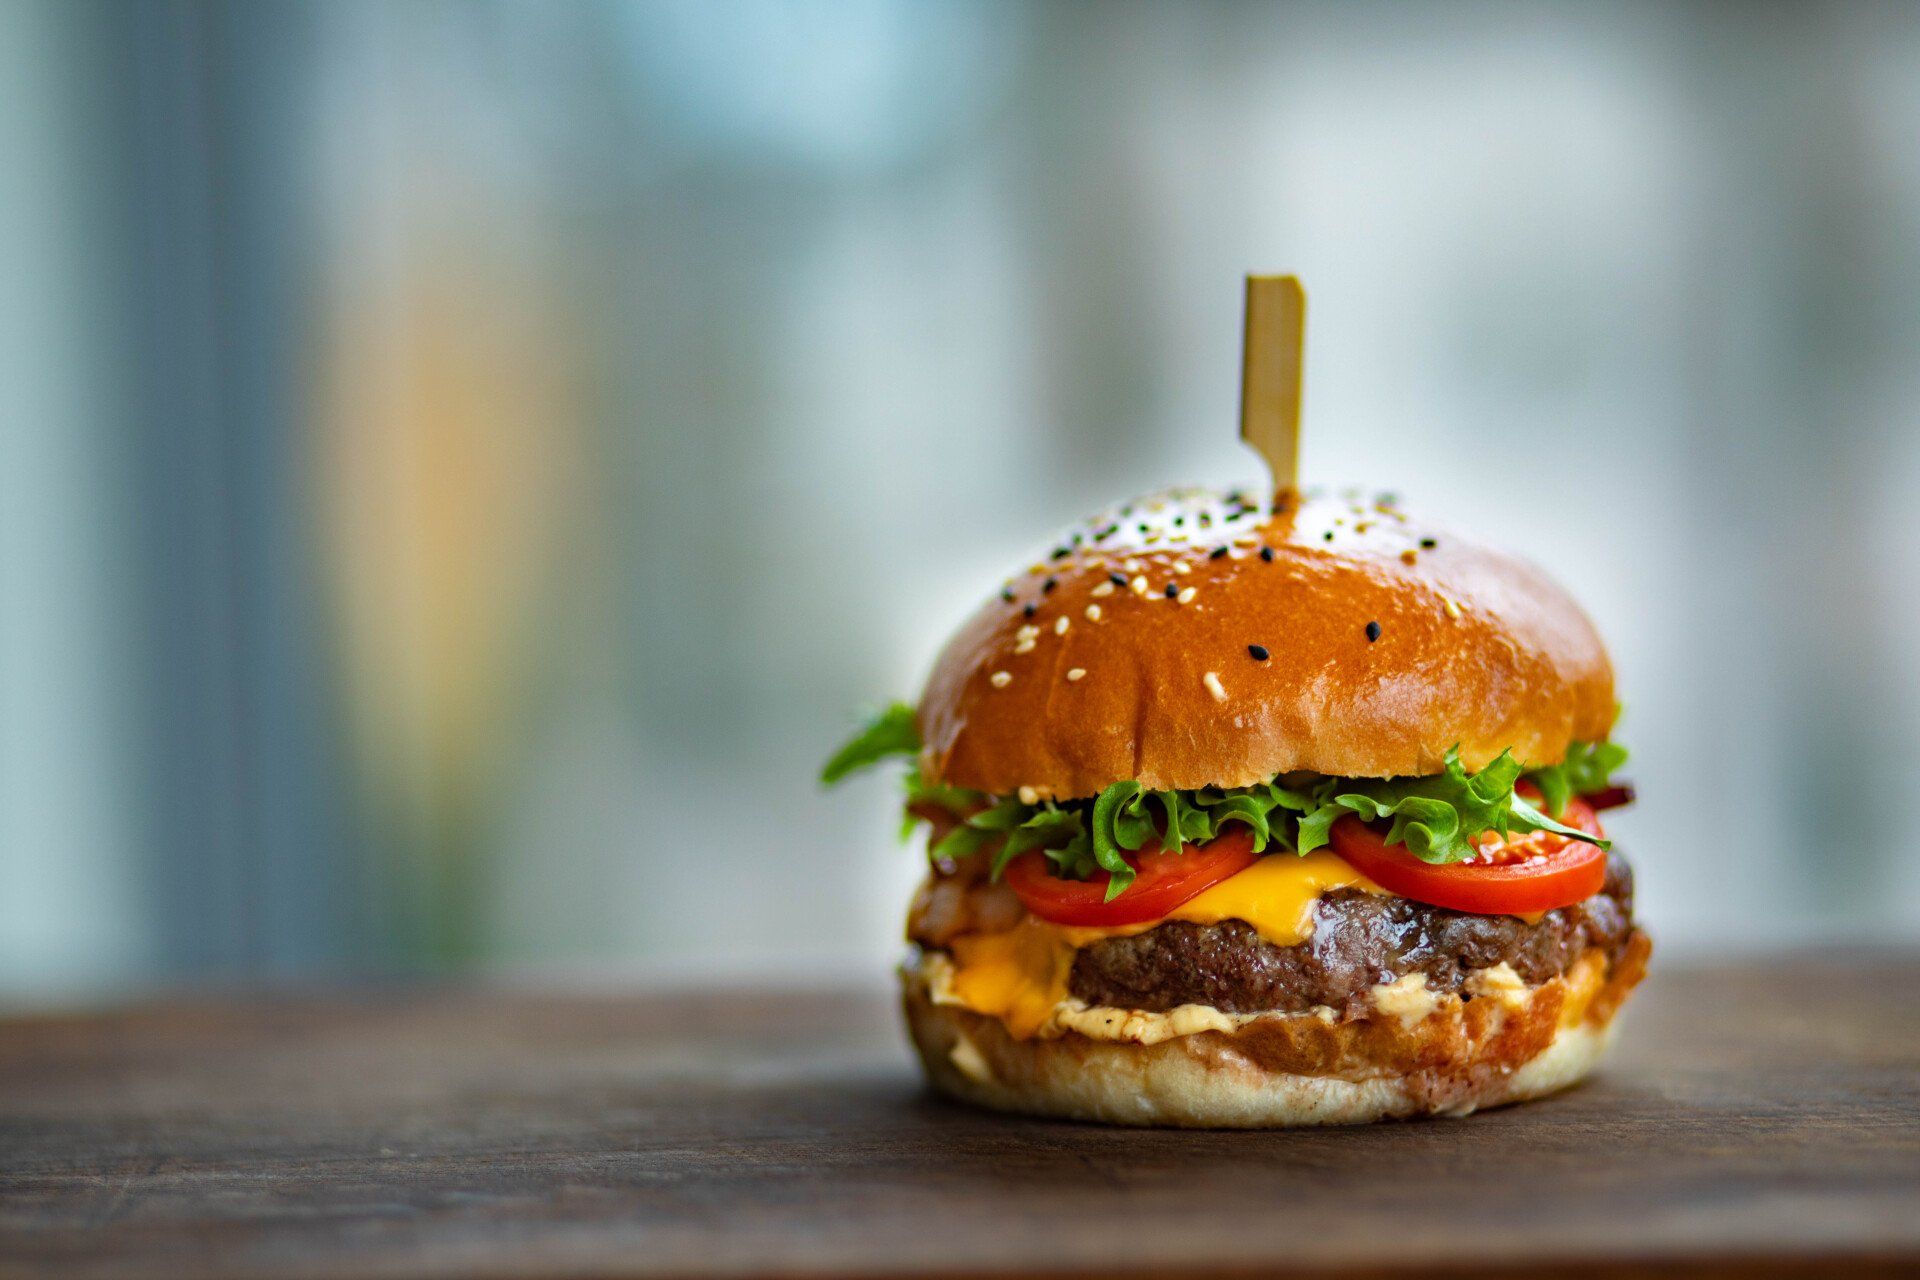 A close up of a hamburger on a wooden table.